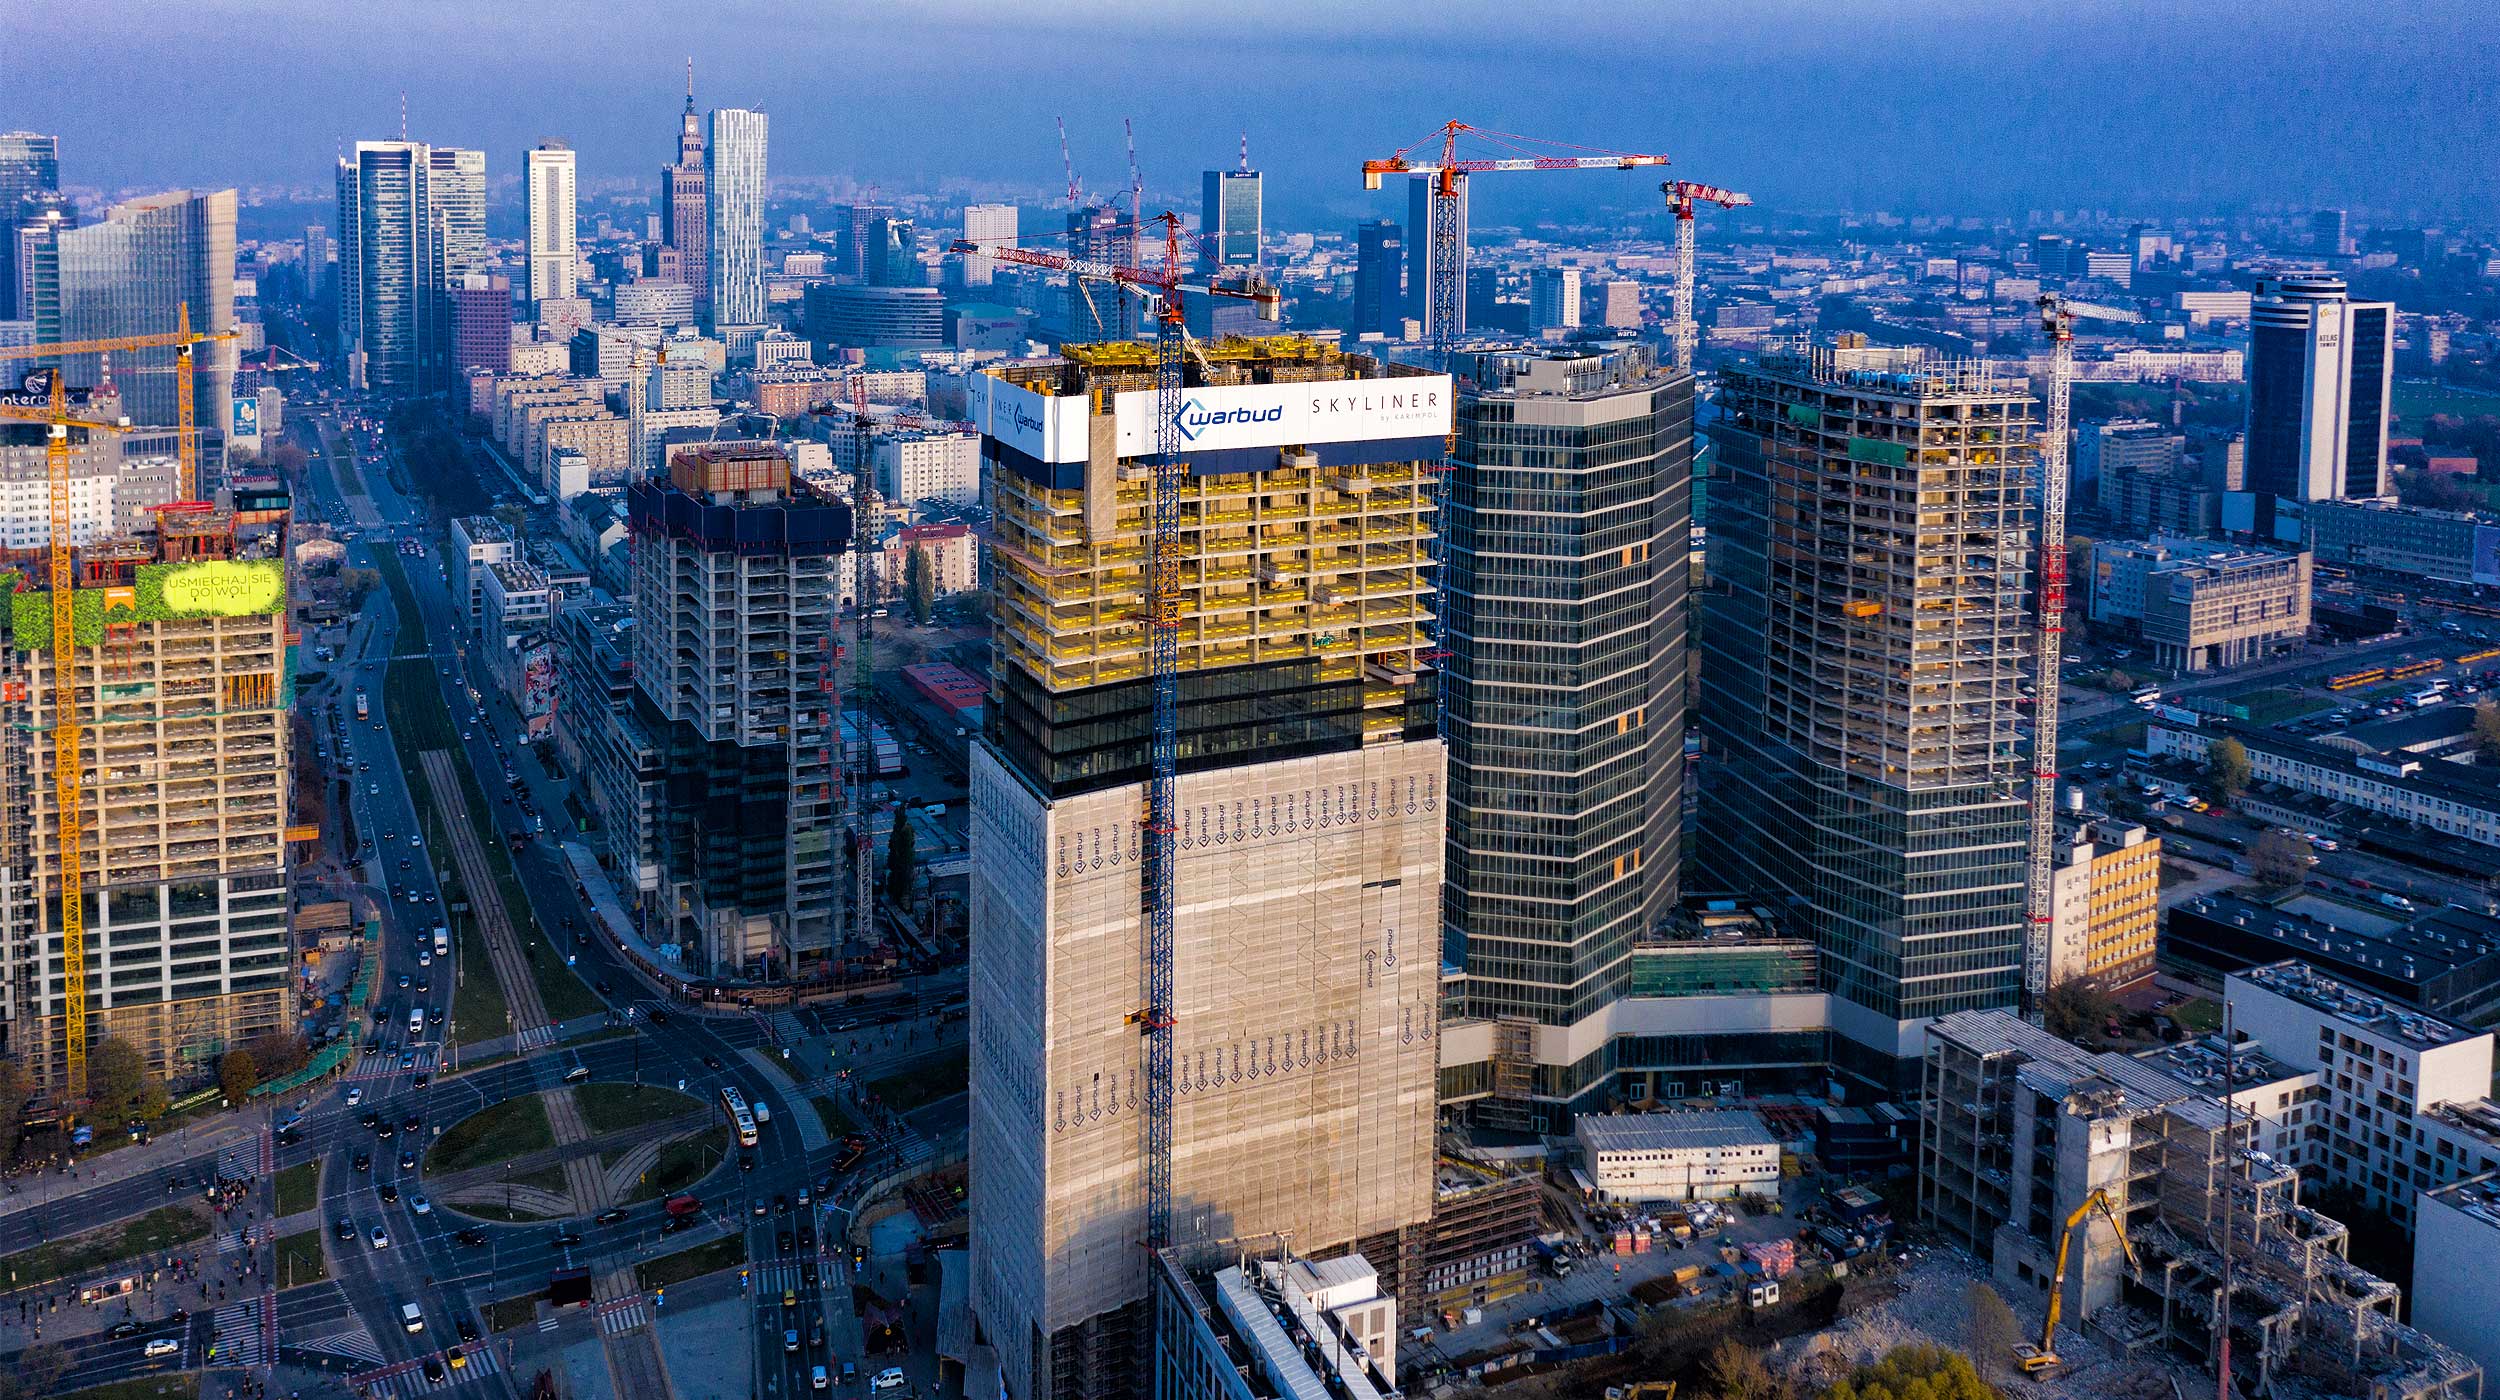 Being built in the center of Warsaw, the office building will reach a height of 195 m and will be one of the tallest buildings in the capital.